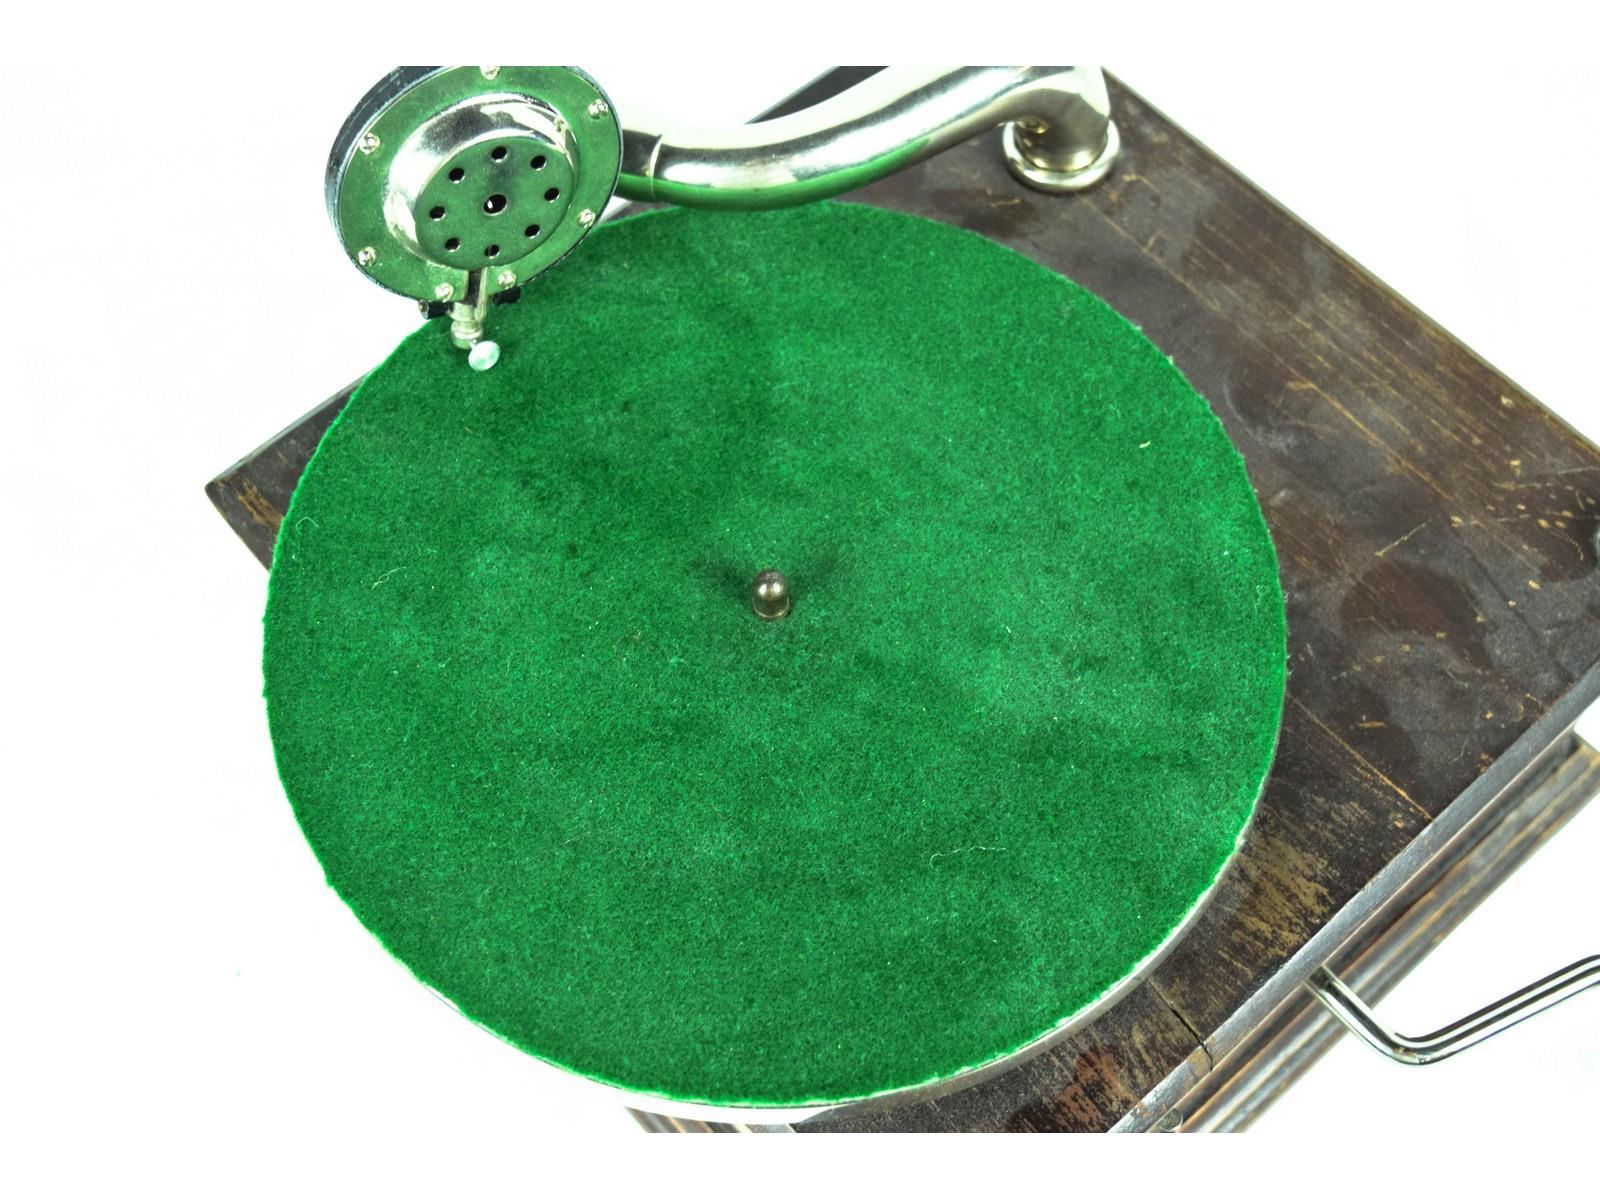 Yale Tabletop Disc Phonograph